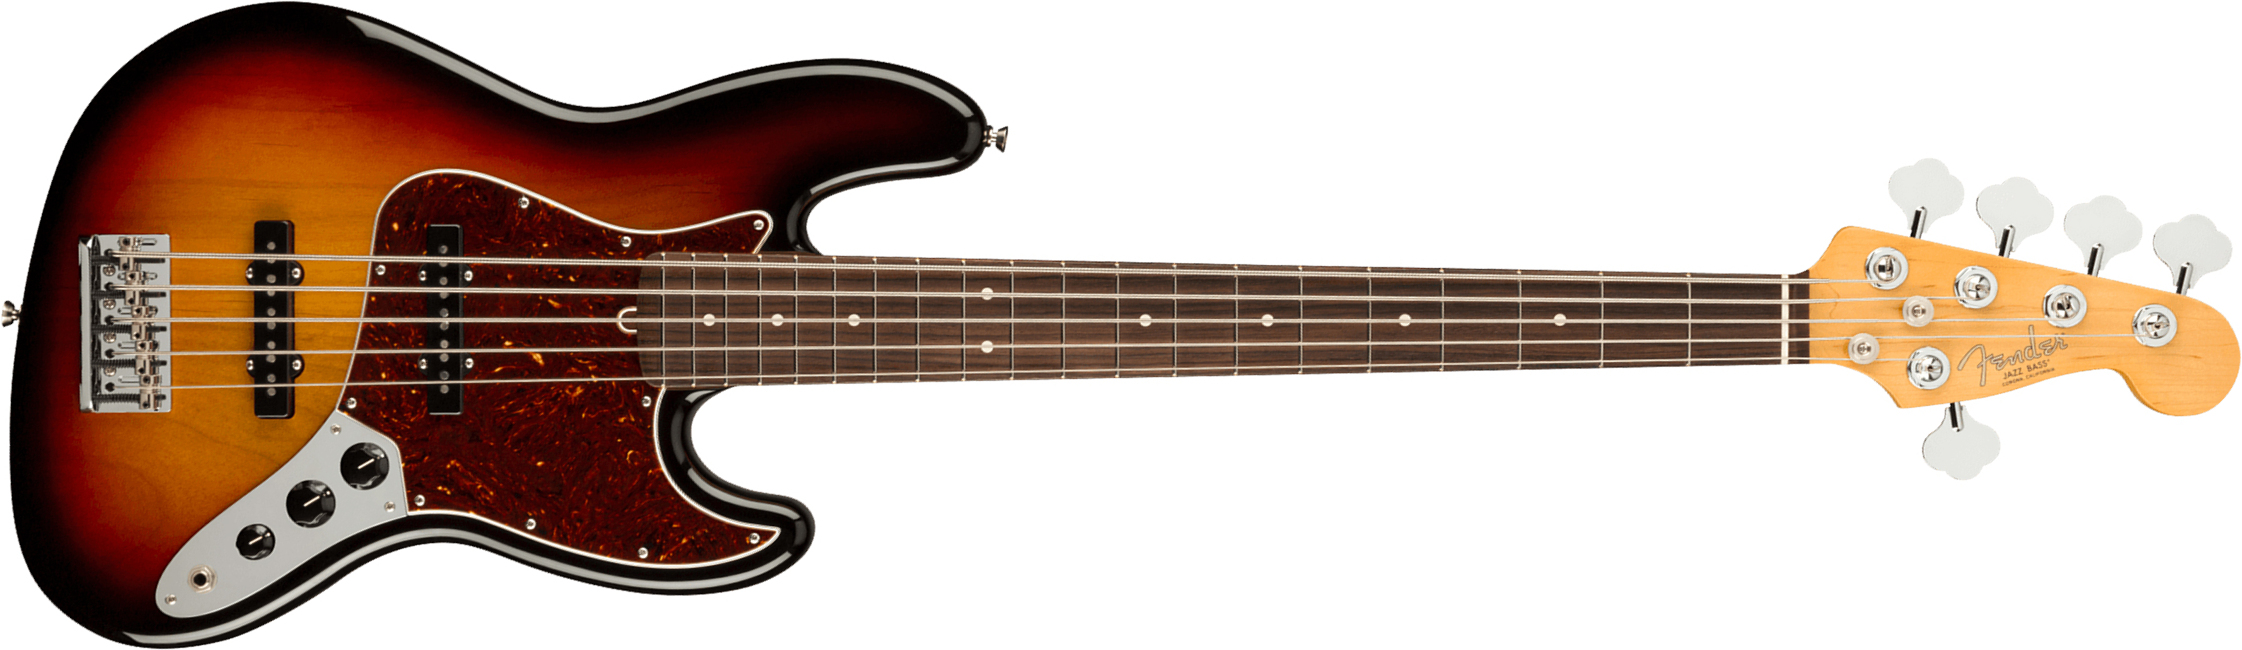 Fender Jazz Bass V American Professional Ii Usa 5-cordes Rw - 3-color Sunburst - Solid body electric bass - Main picture